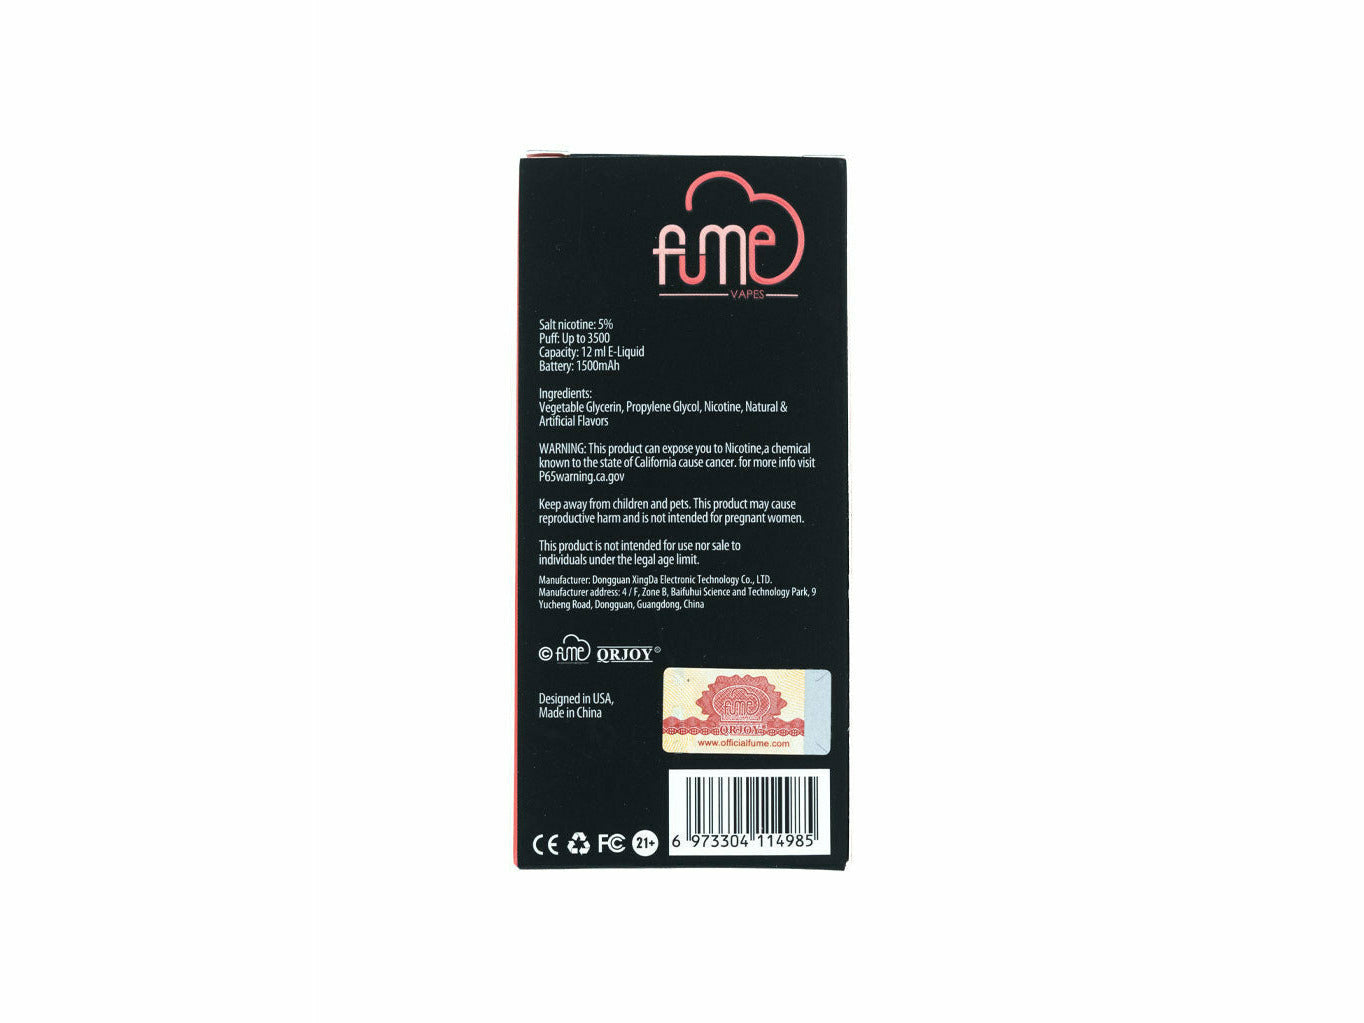 Fume Lychee Ice Infinity disposable, back package description